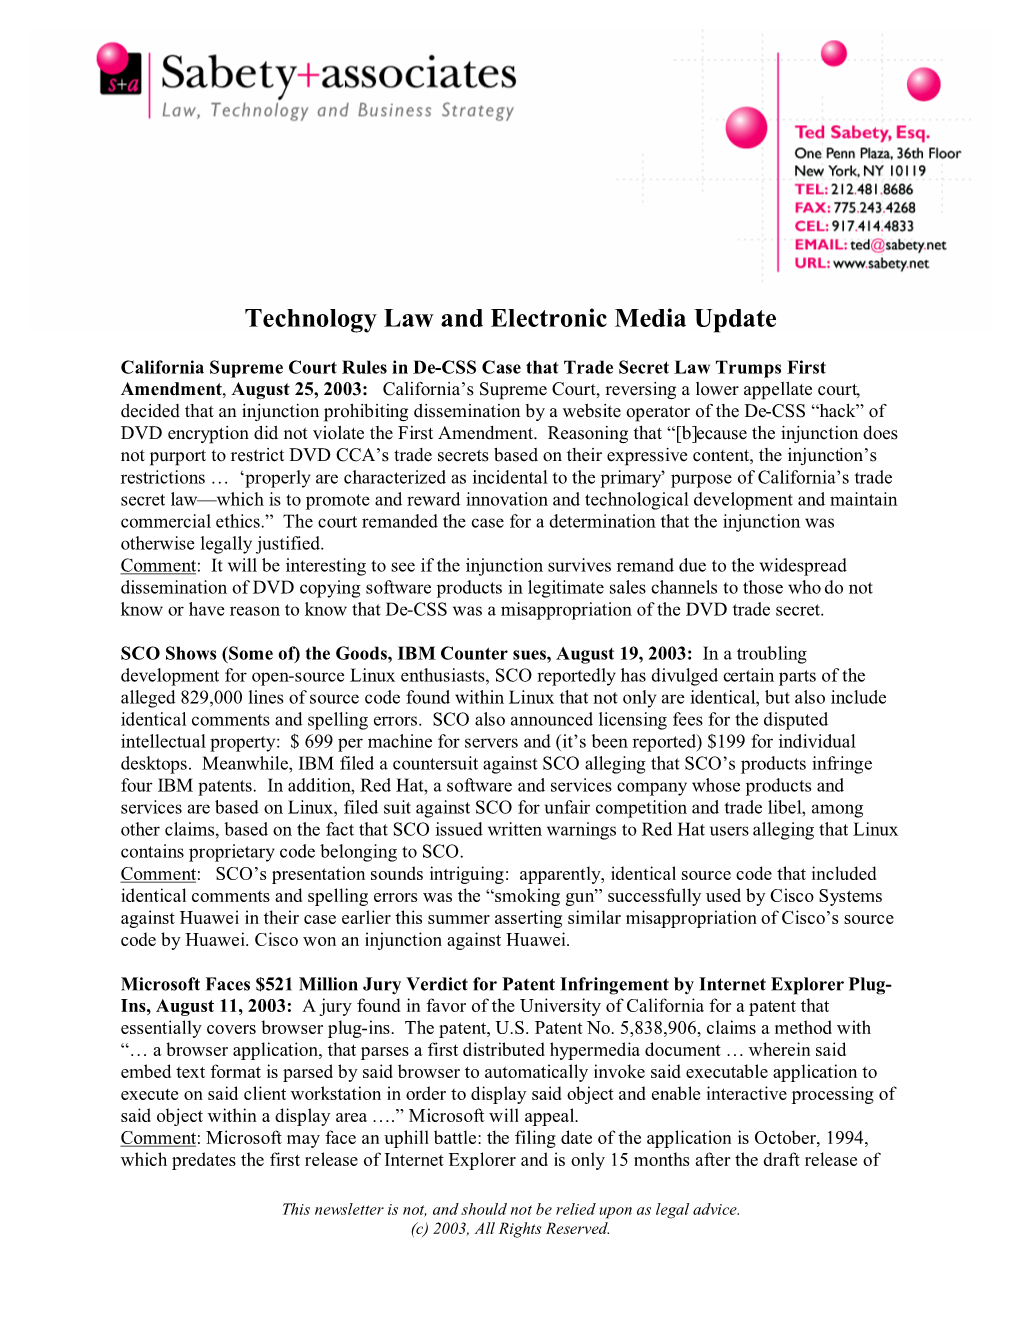 Technology Law and Electronic Media Update